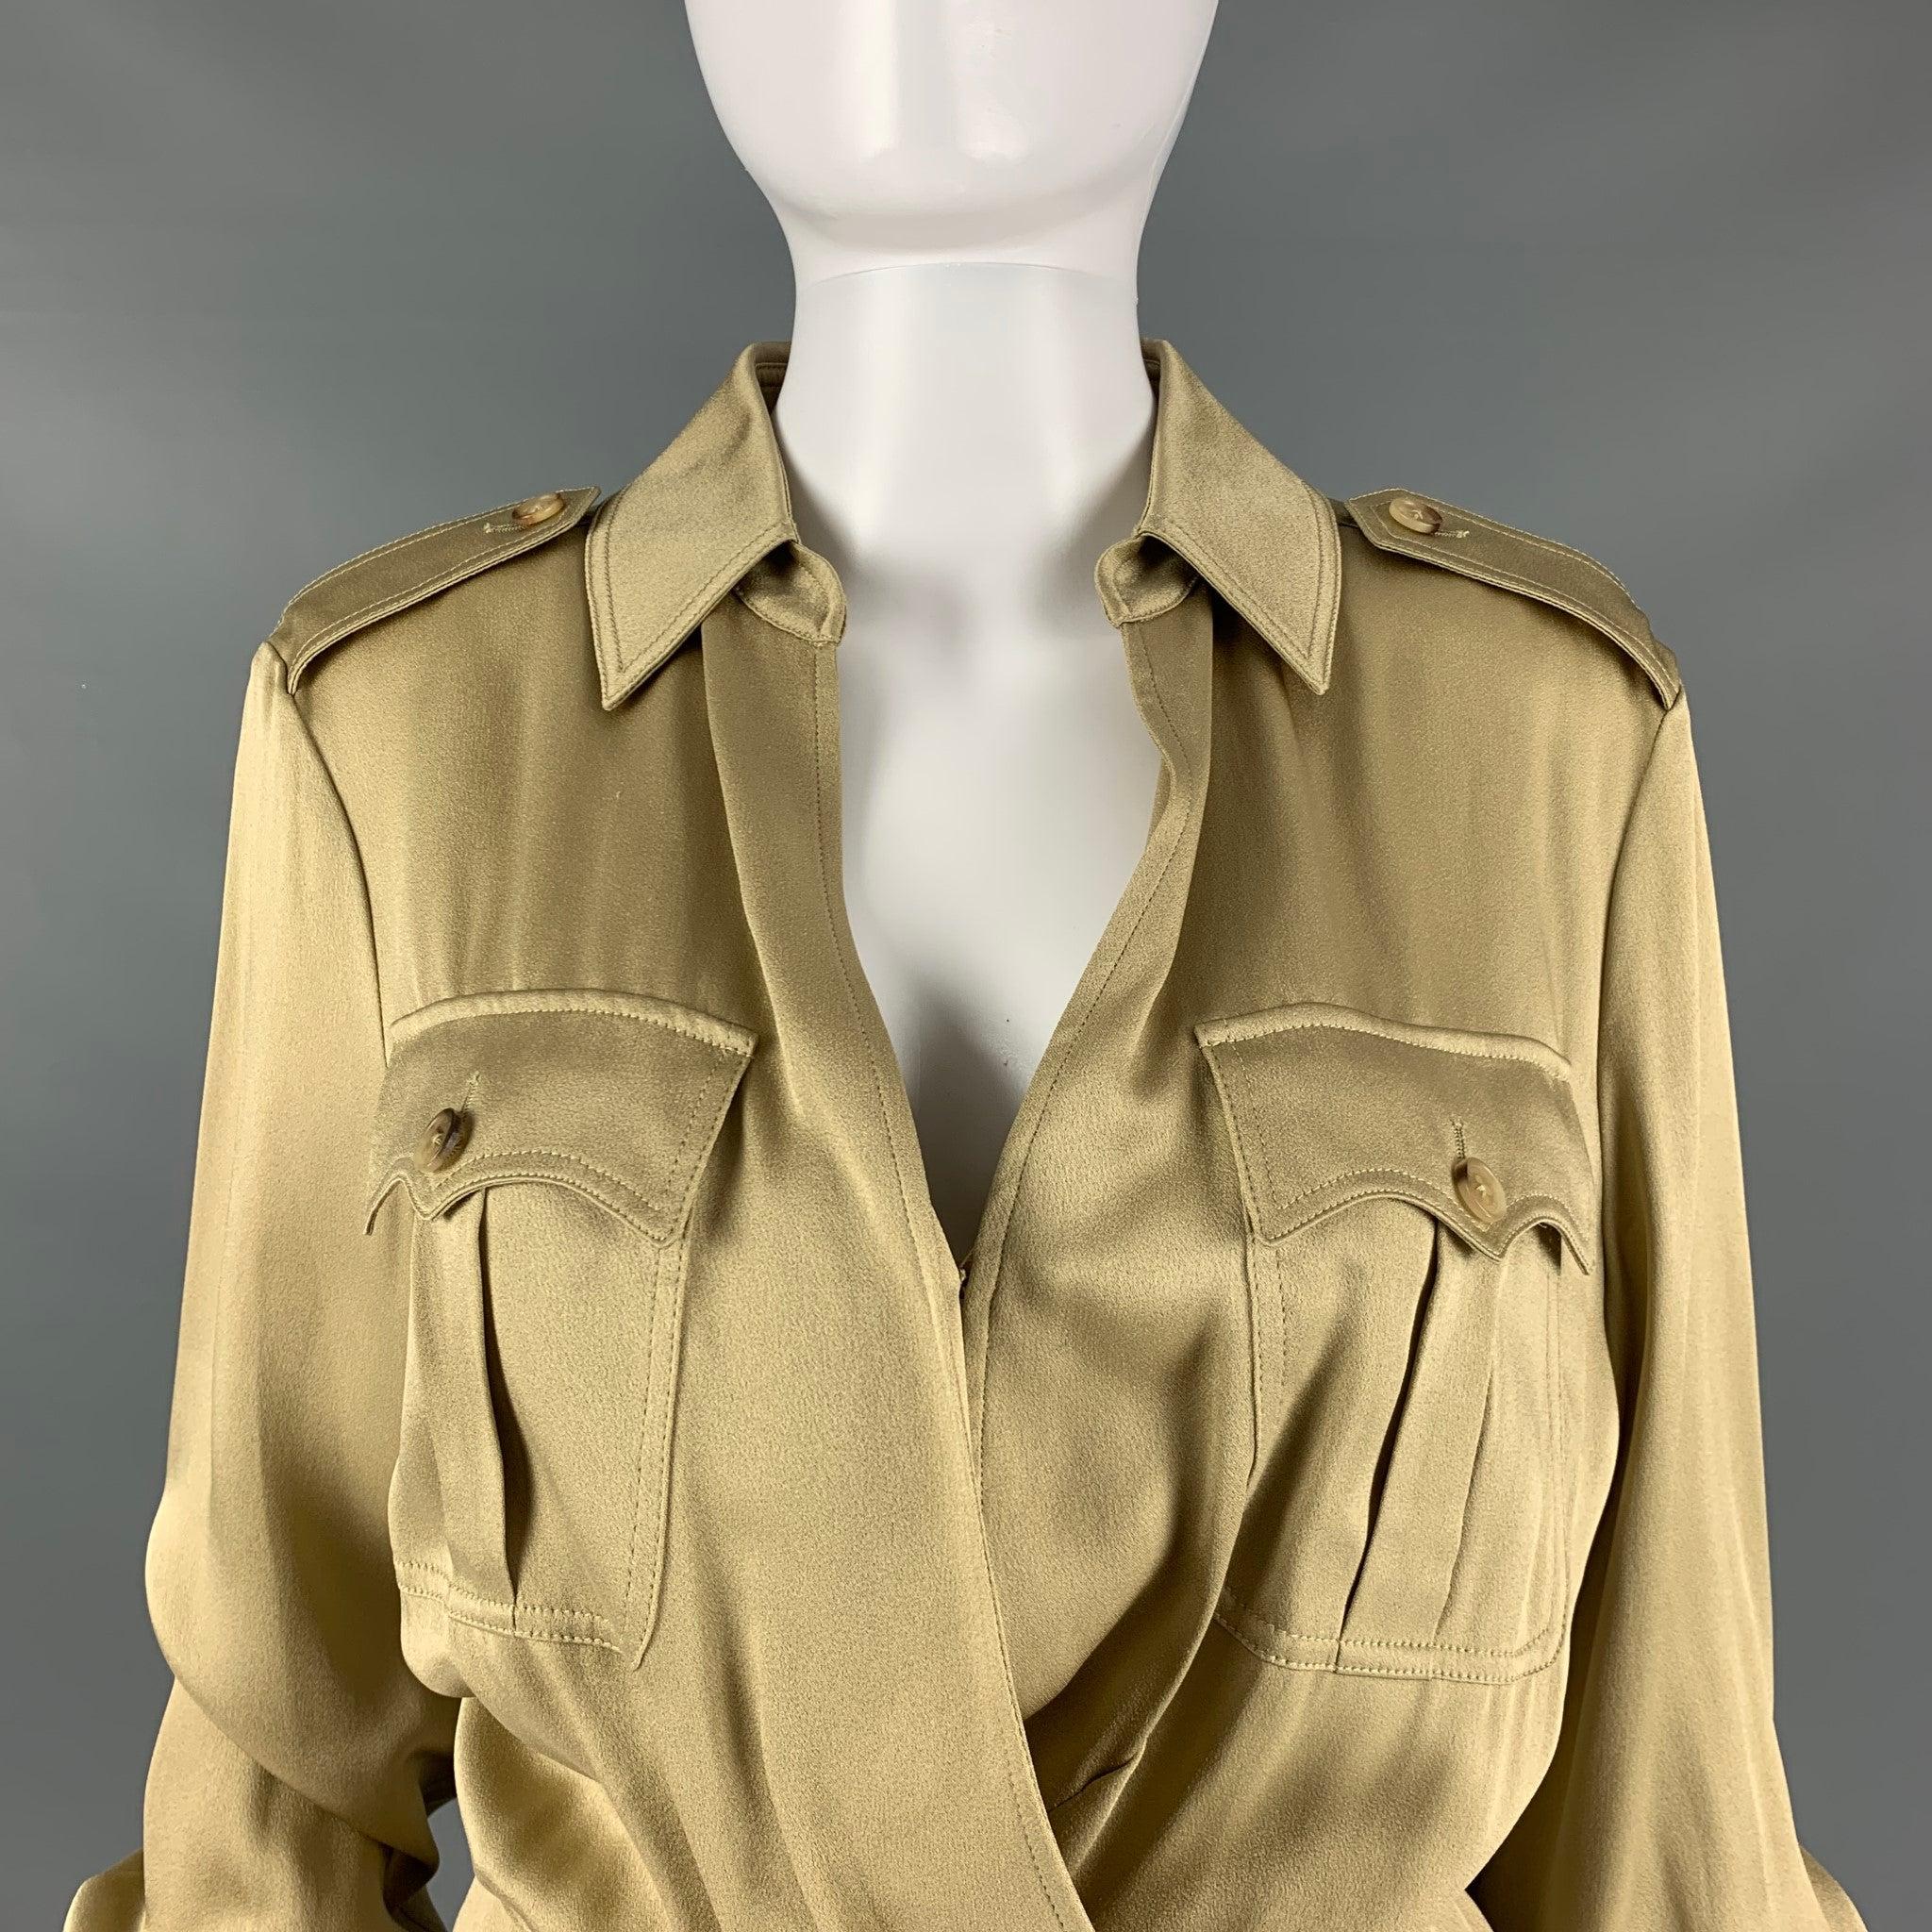 RALPH LAUREN COLLECTION dress in a gold tone viscose sateen fabric featuring a faux wrap style, V-neck, belted, long sleeves, and below knee length.Very Good Pre-Owned Condition. Minor signs of wear. 

Marked:  8 

Measurements: 
 
Shoulder: 16.5